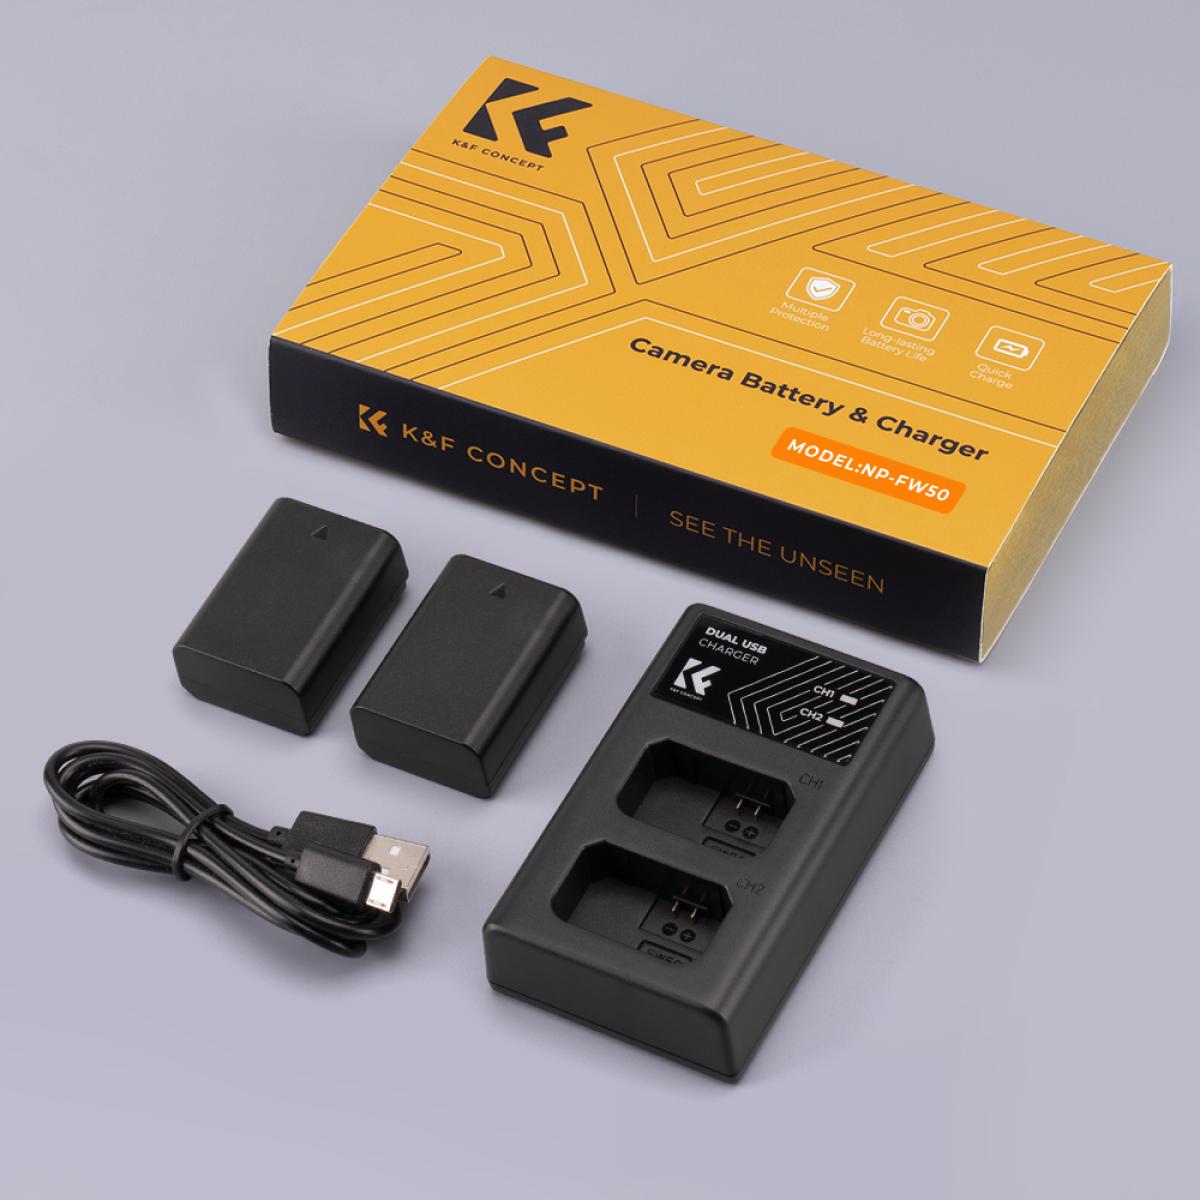 K&F Concept NP-FW50 sony battery and dual slot battery charger kit